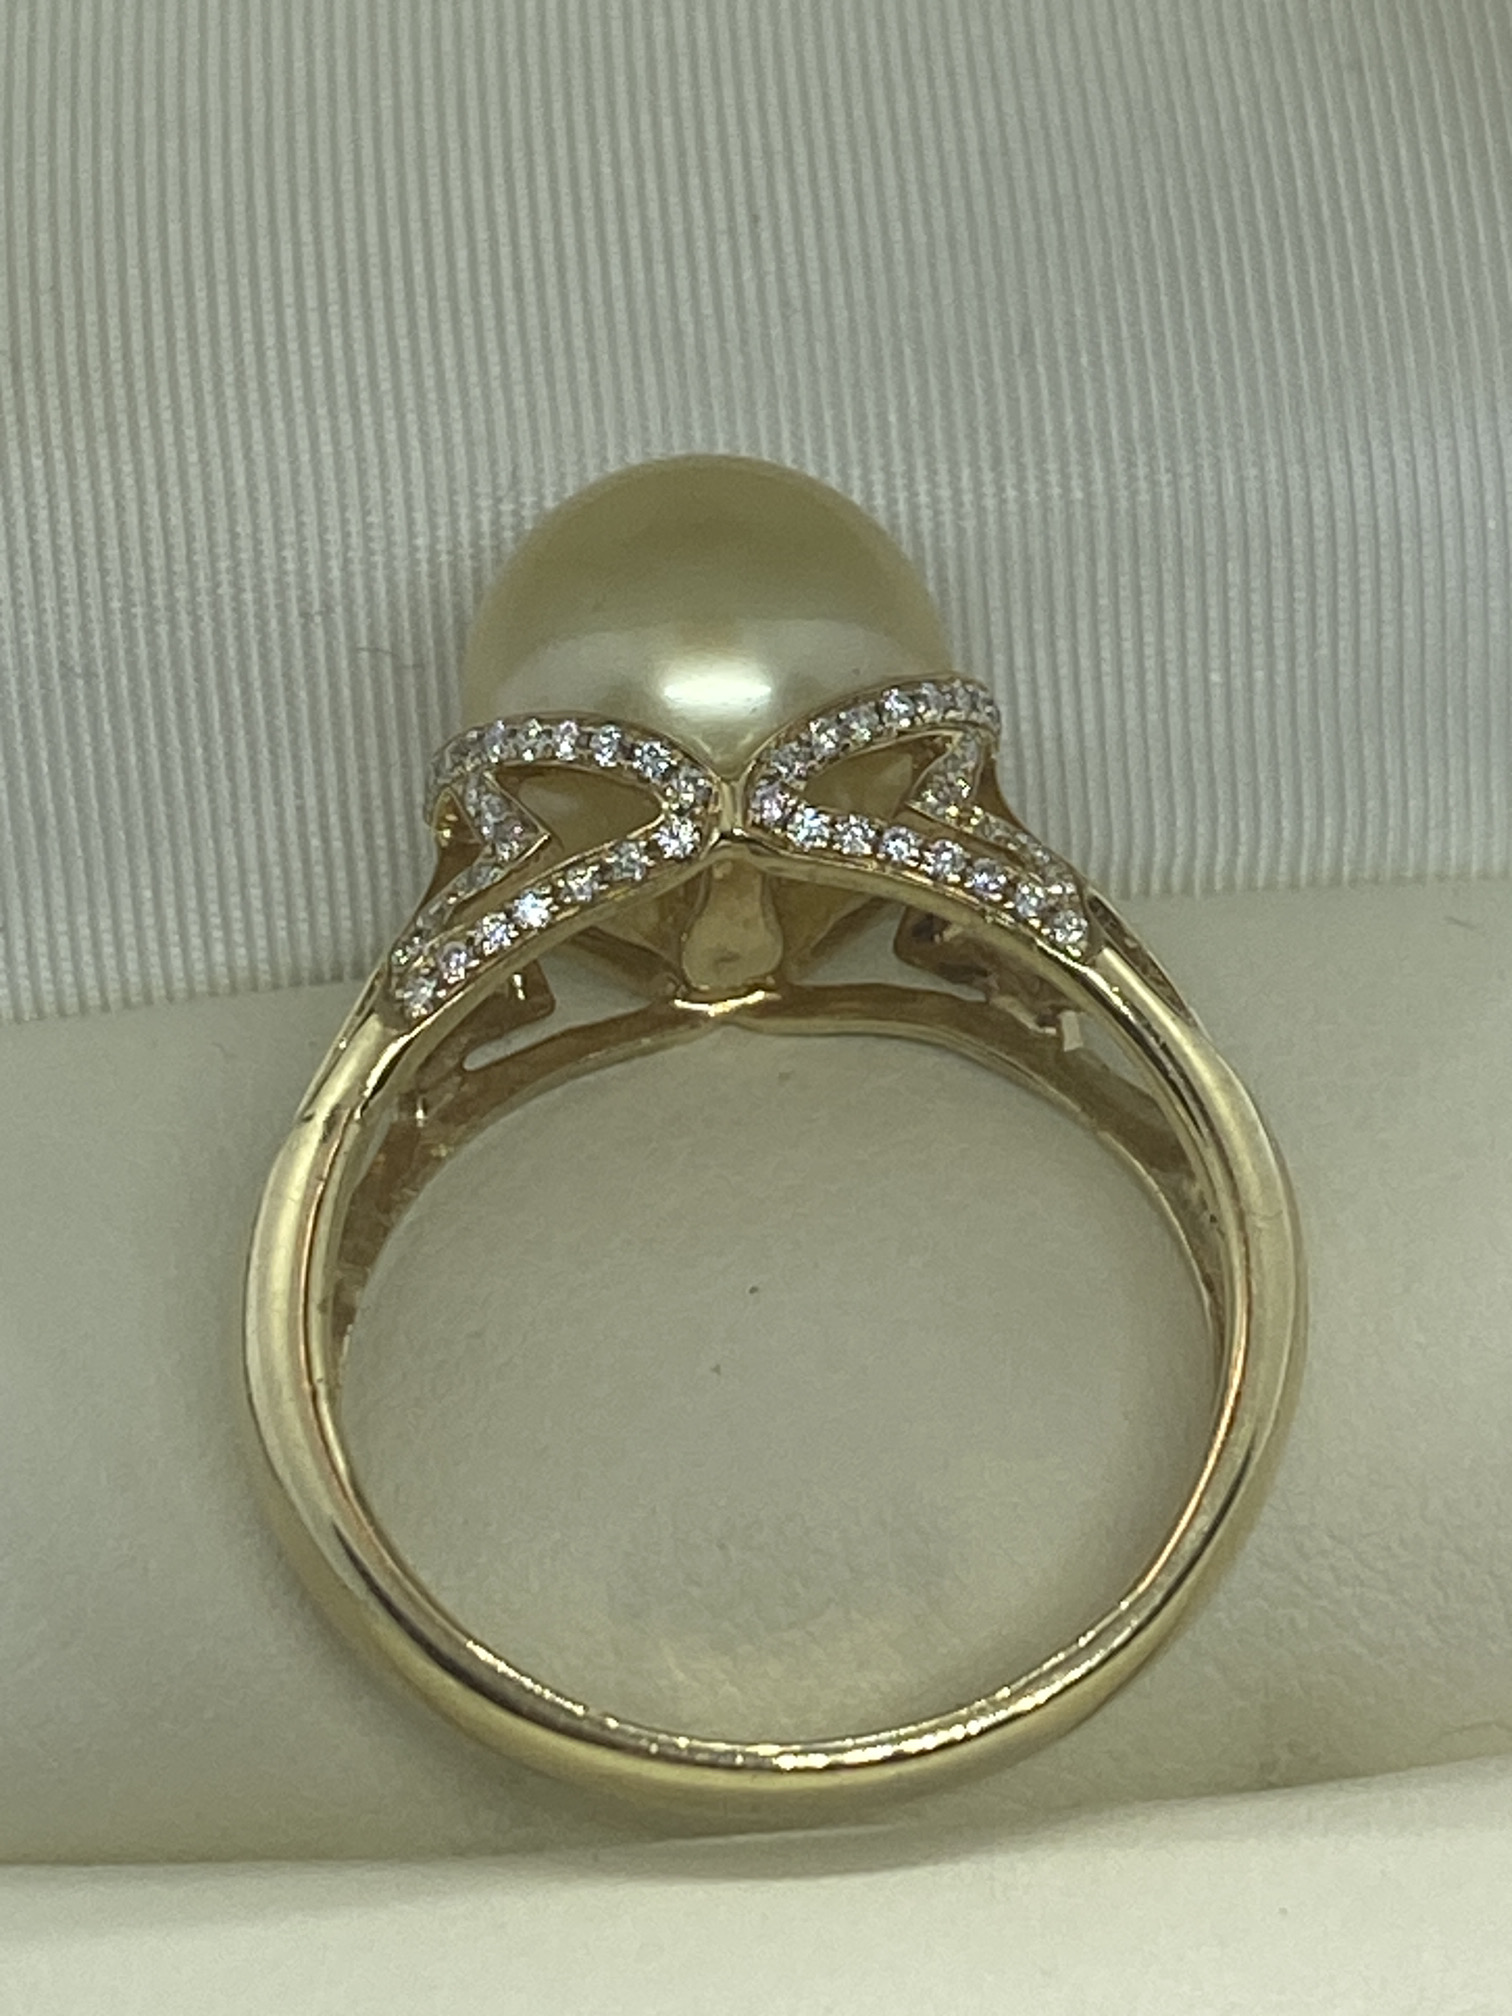 14ct YELLOW GOLD SOUTH SEA PEARL AND DIAMOND RING APPROX. SIZE O VALUATION £3,000 APPROX. 5.3g - Image 2 of 3